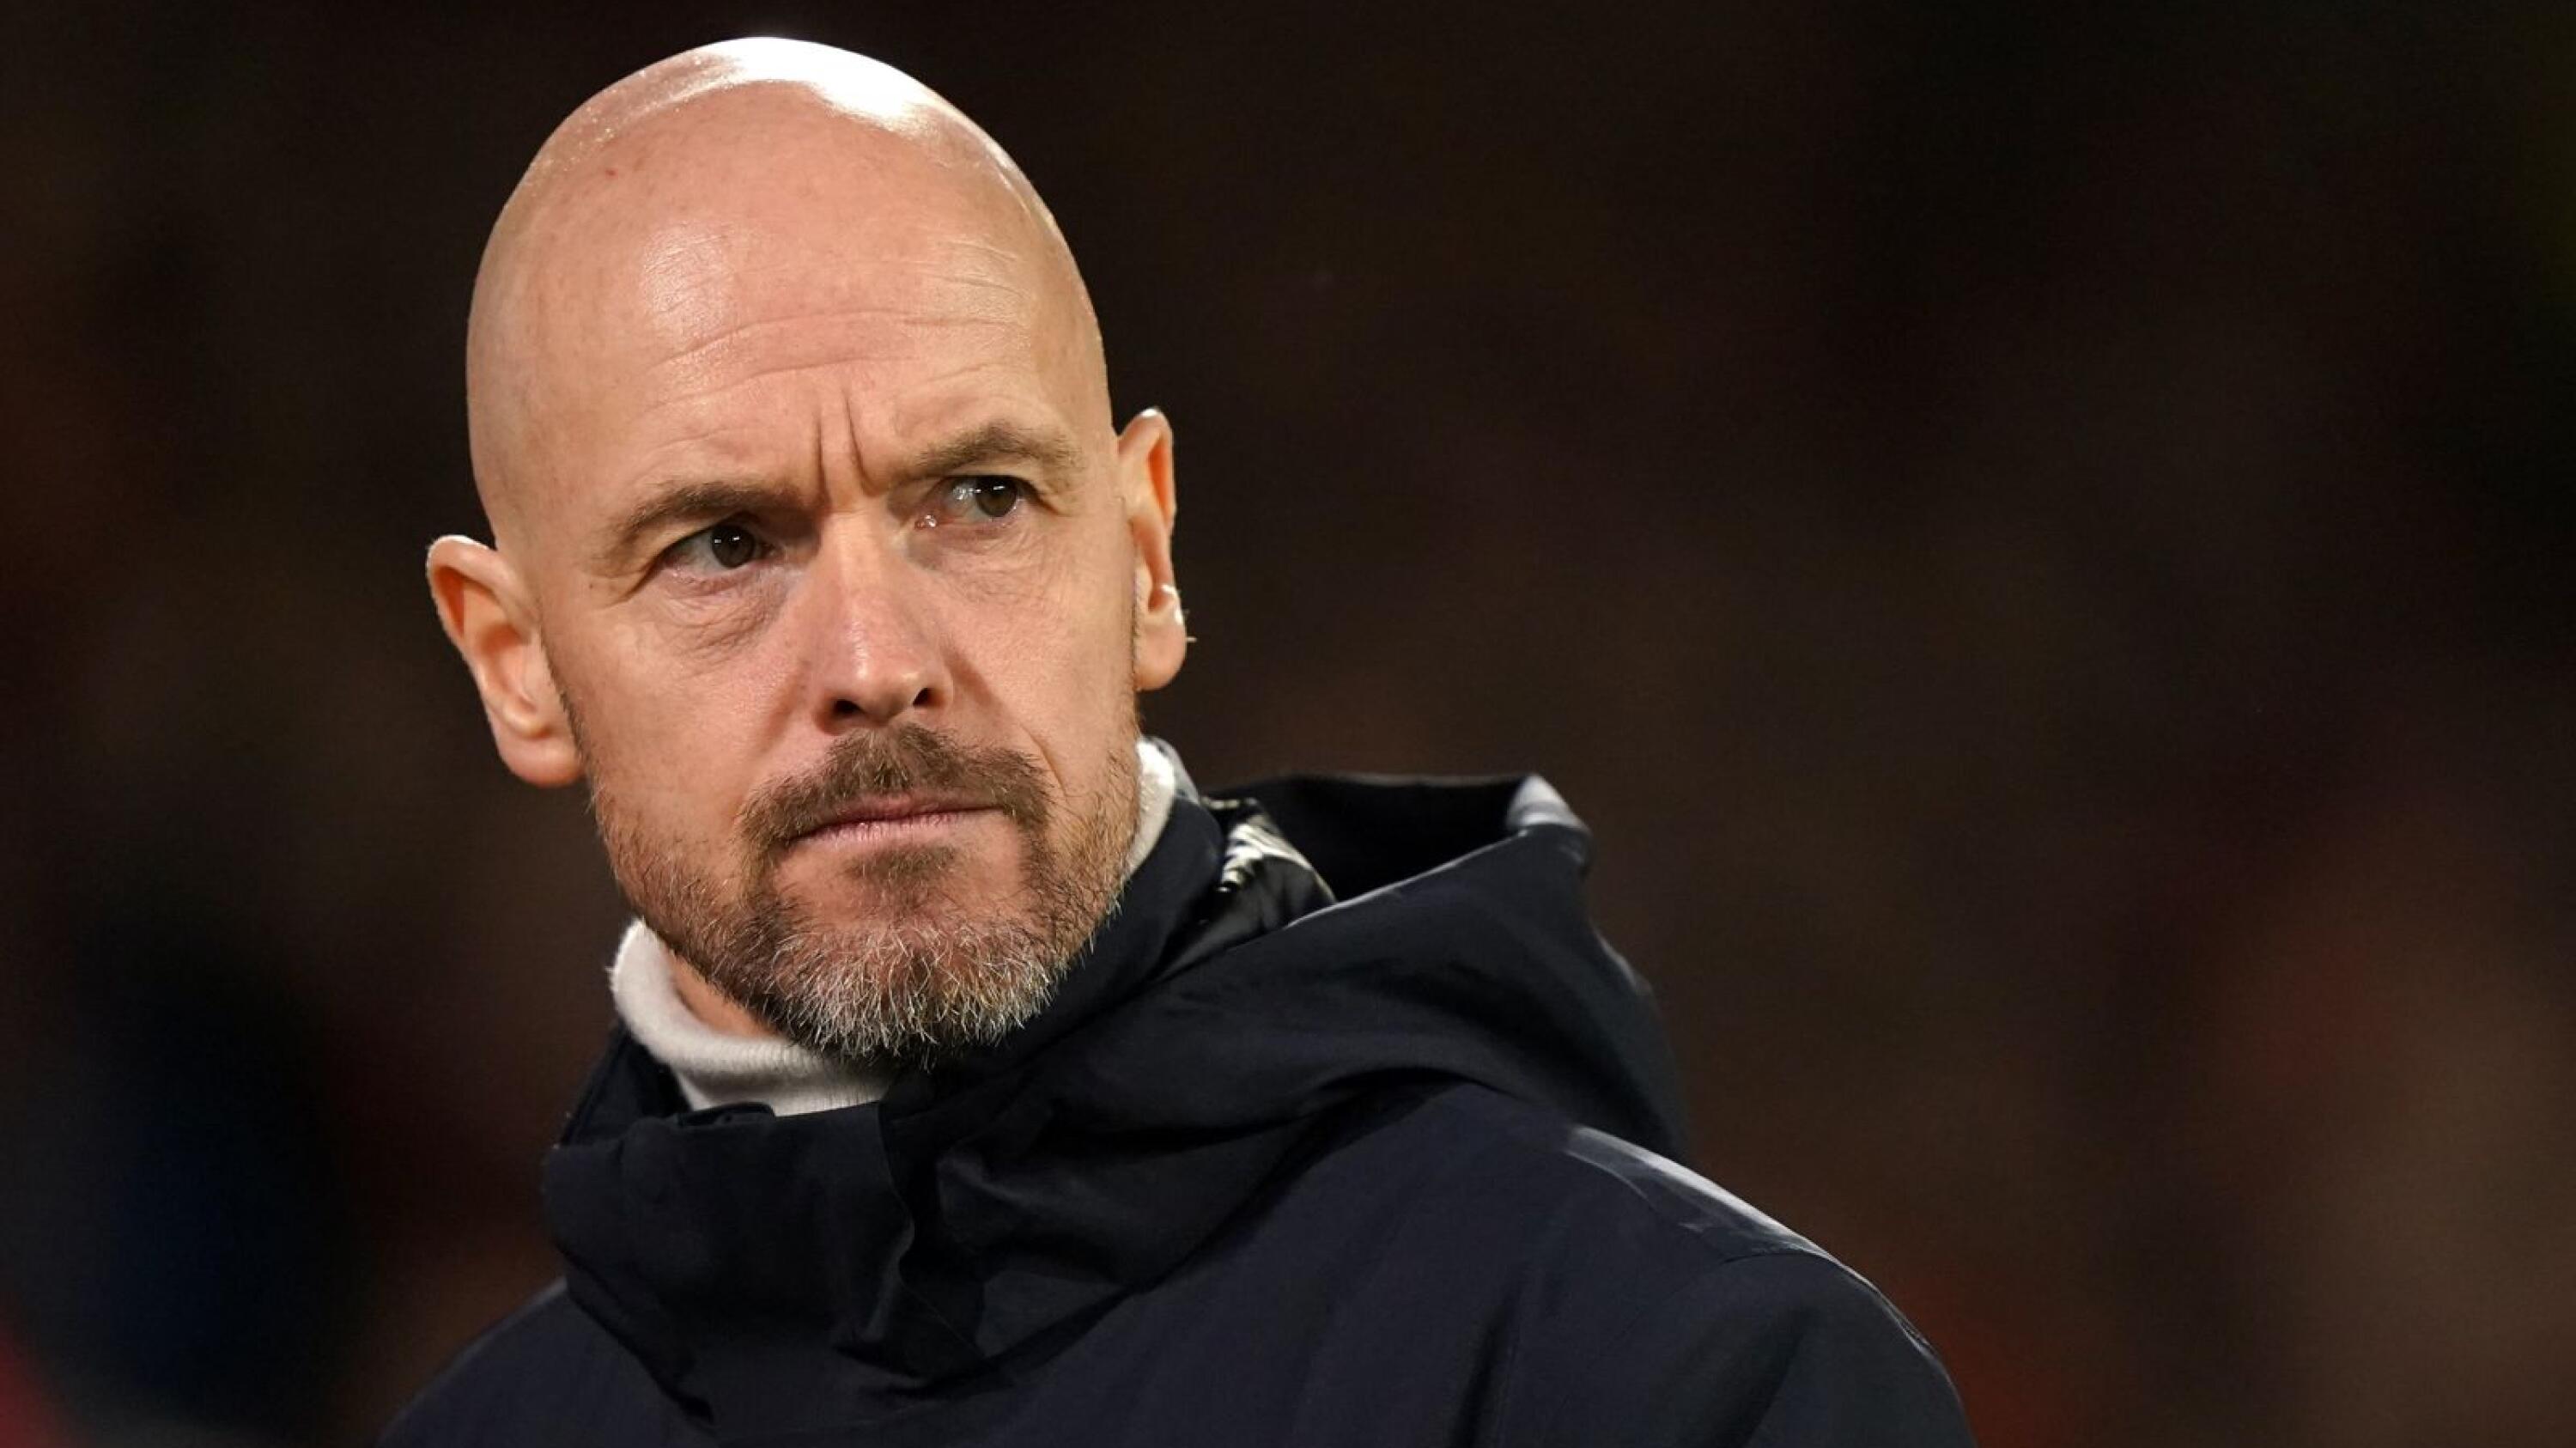 Erik ten Hag has criticised Leeds’ decision to sack Jesse Marsch after just a year in the hot seat.